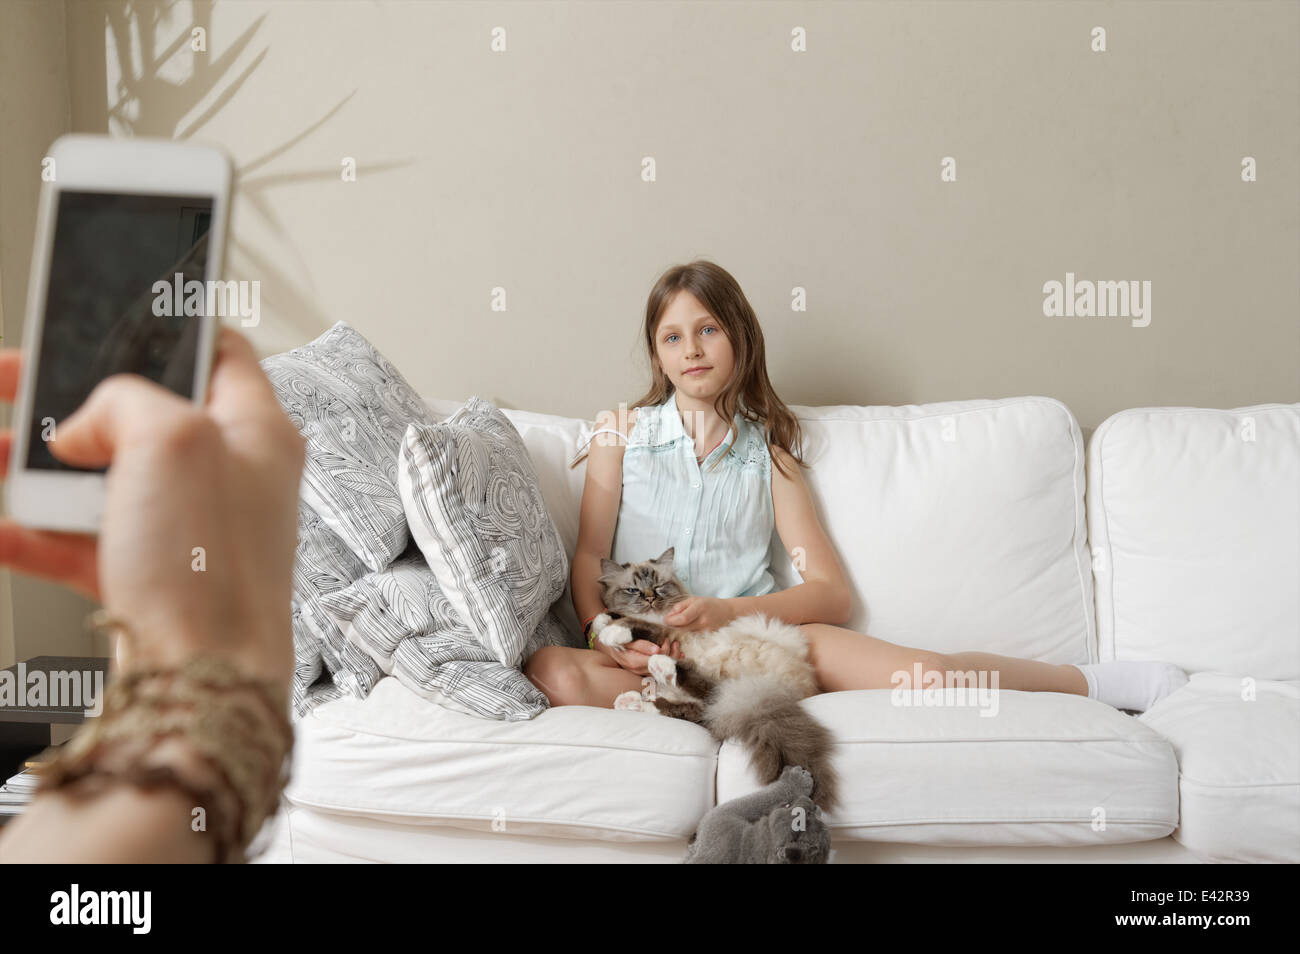 Mother photographing daughter with cat on sofa Stock Photo